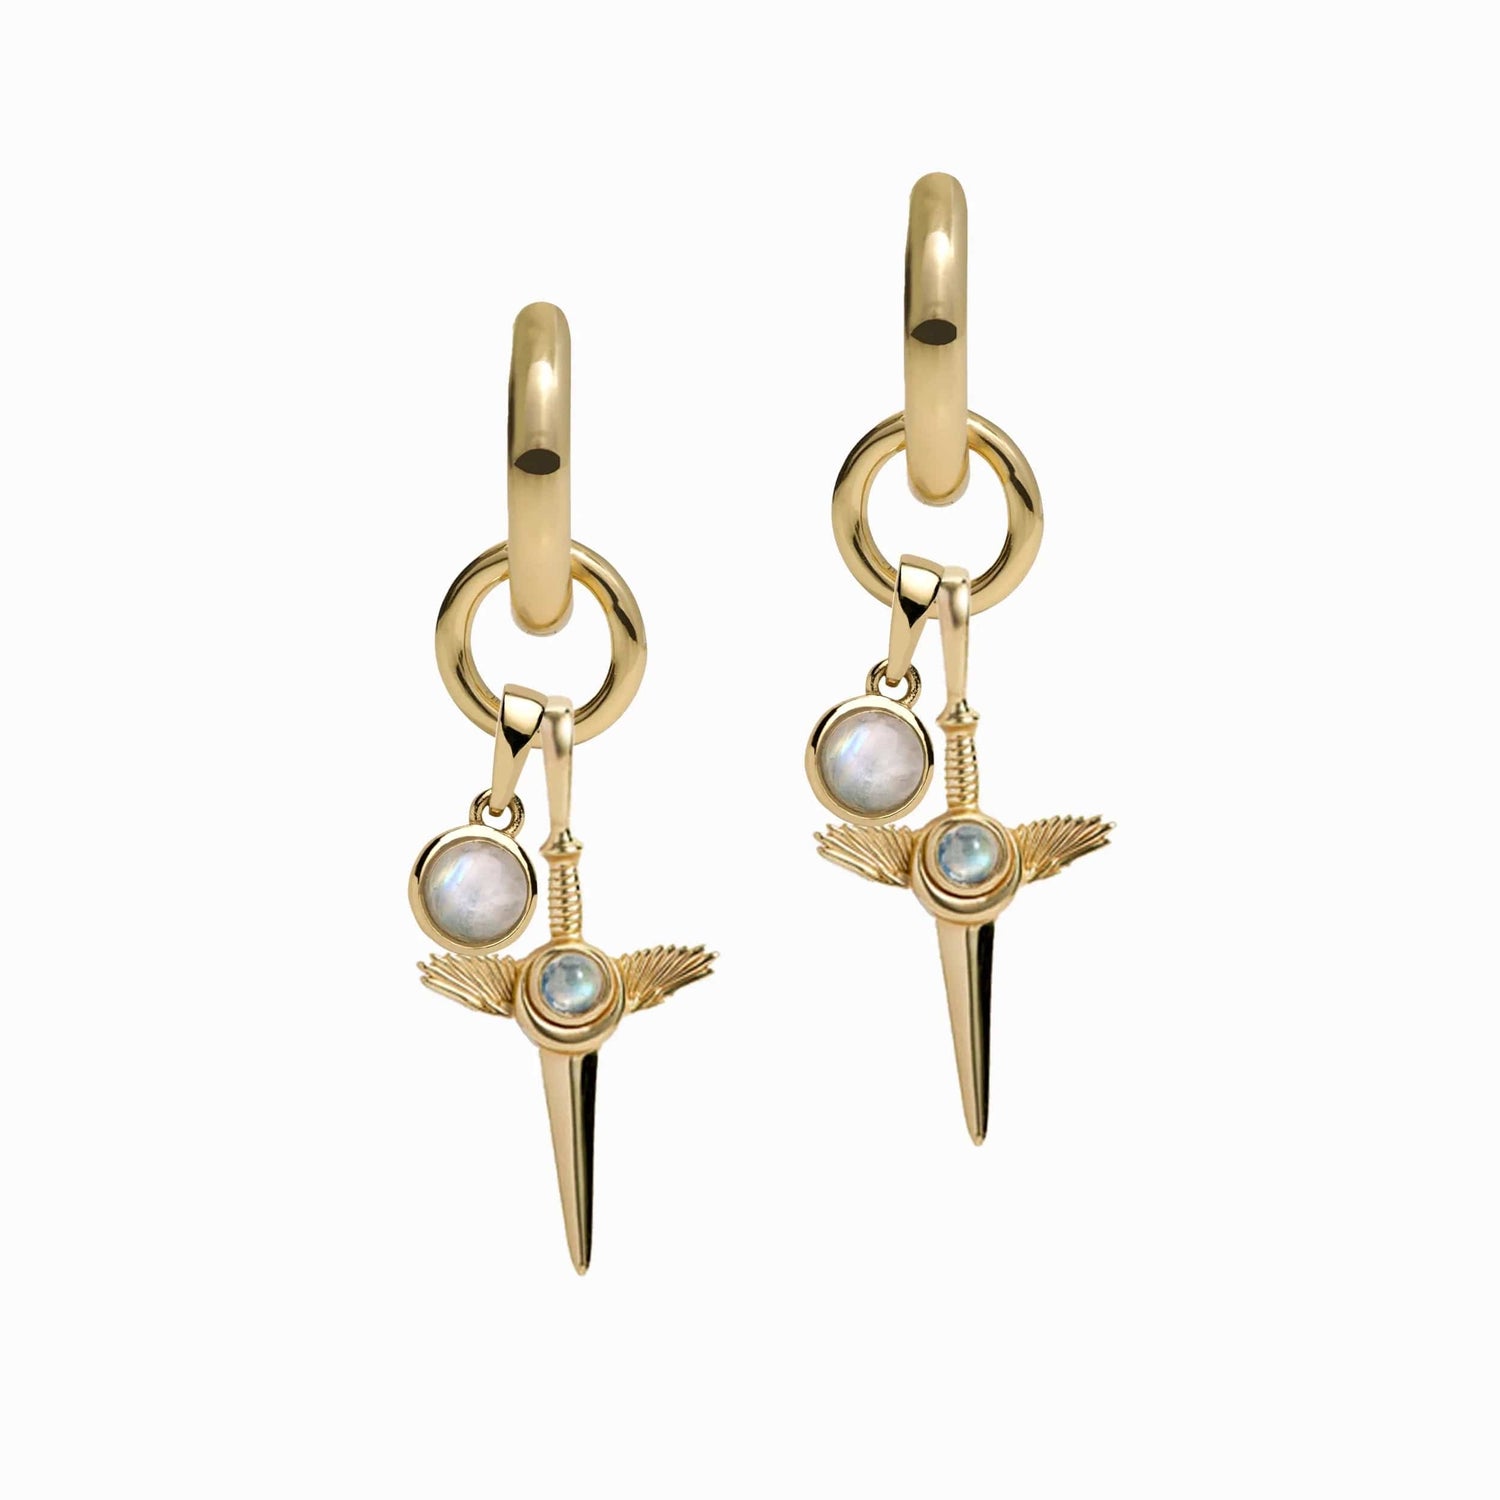 Product image of Awe Inspired Earrings 14K Yellow Gold Vermeil / Pair Blood Moon Rising Earring Set